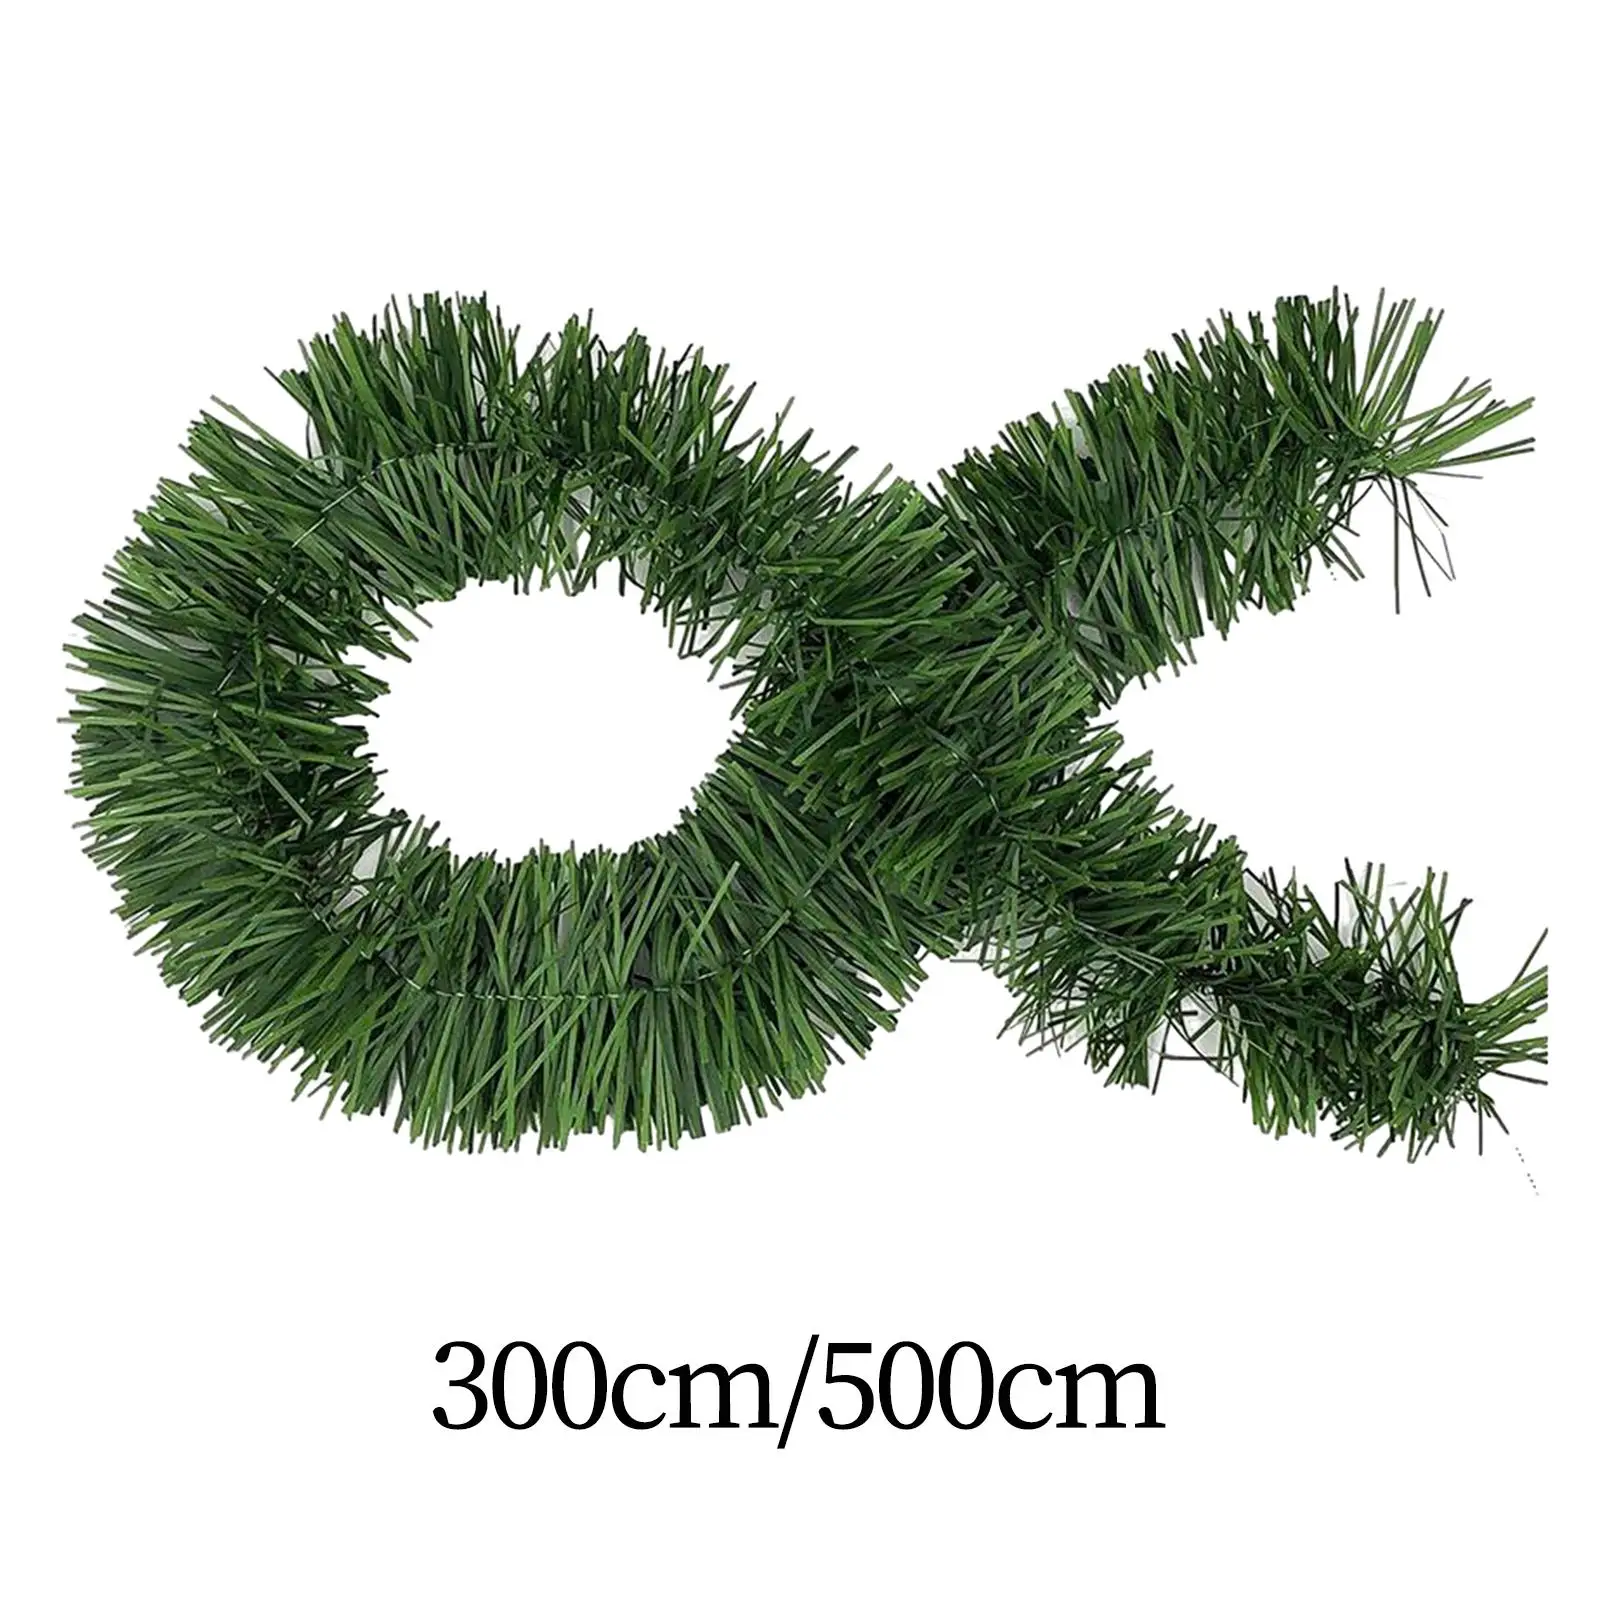 Christmas Garland Christmas Tree Decorations Hanging Ornament Home Decor Xmas Garland for Fireplace Party Wedding Mantel Stairs